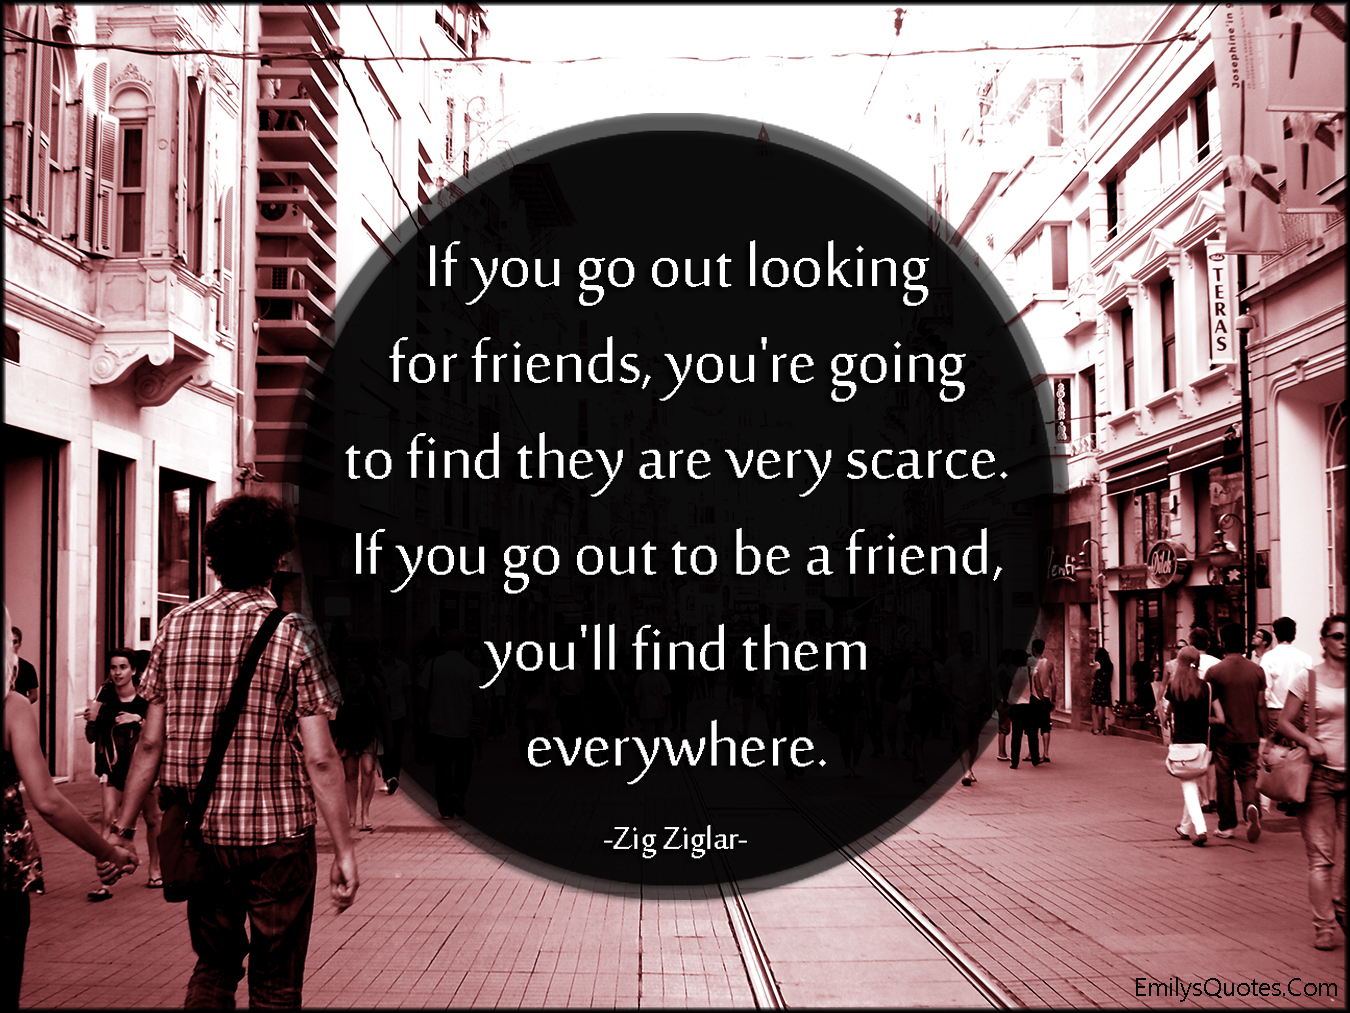 If you go out looking for friends, you’re going to find they are very scarc...